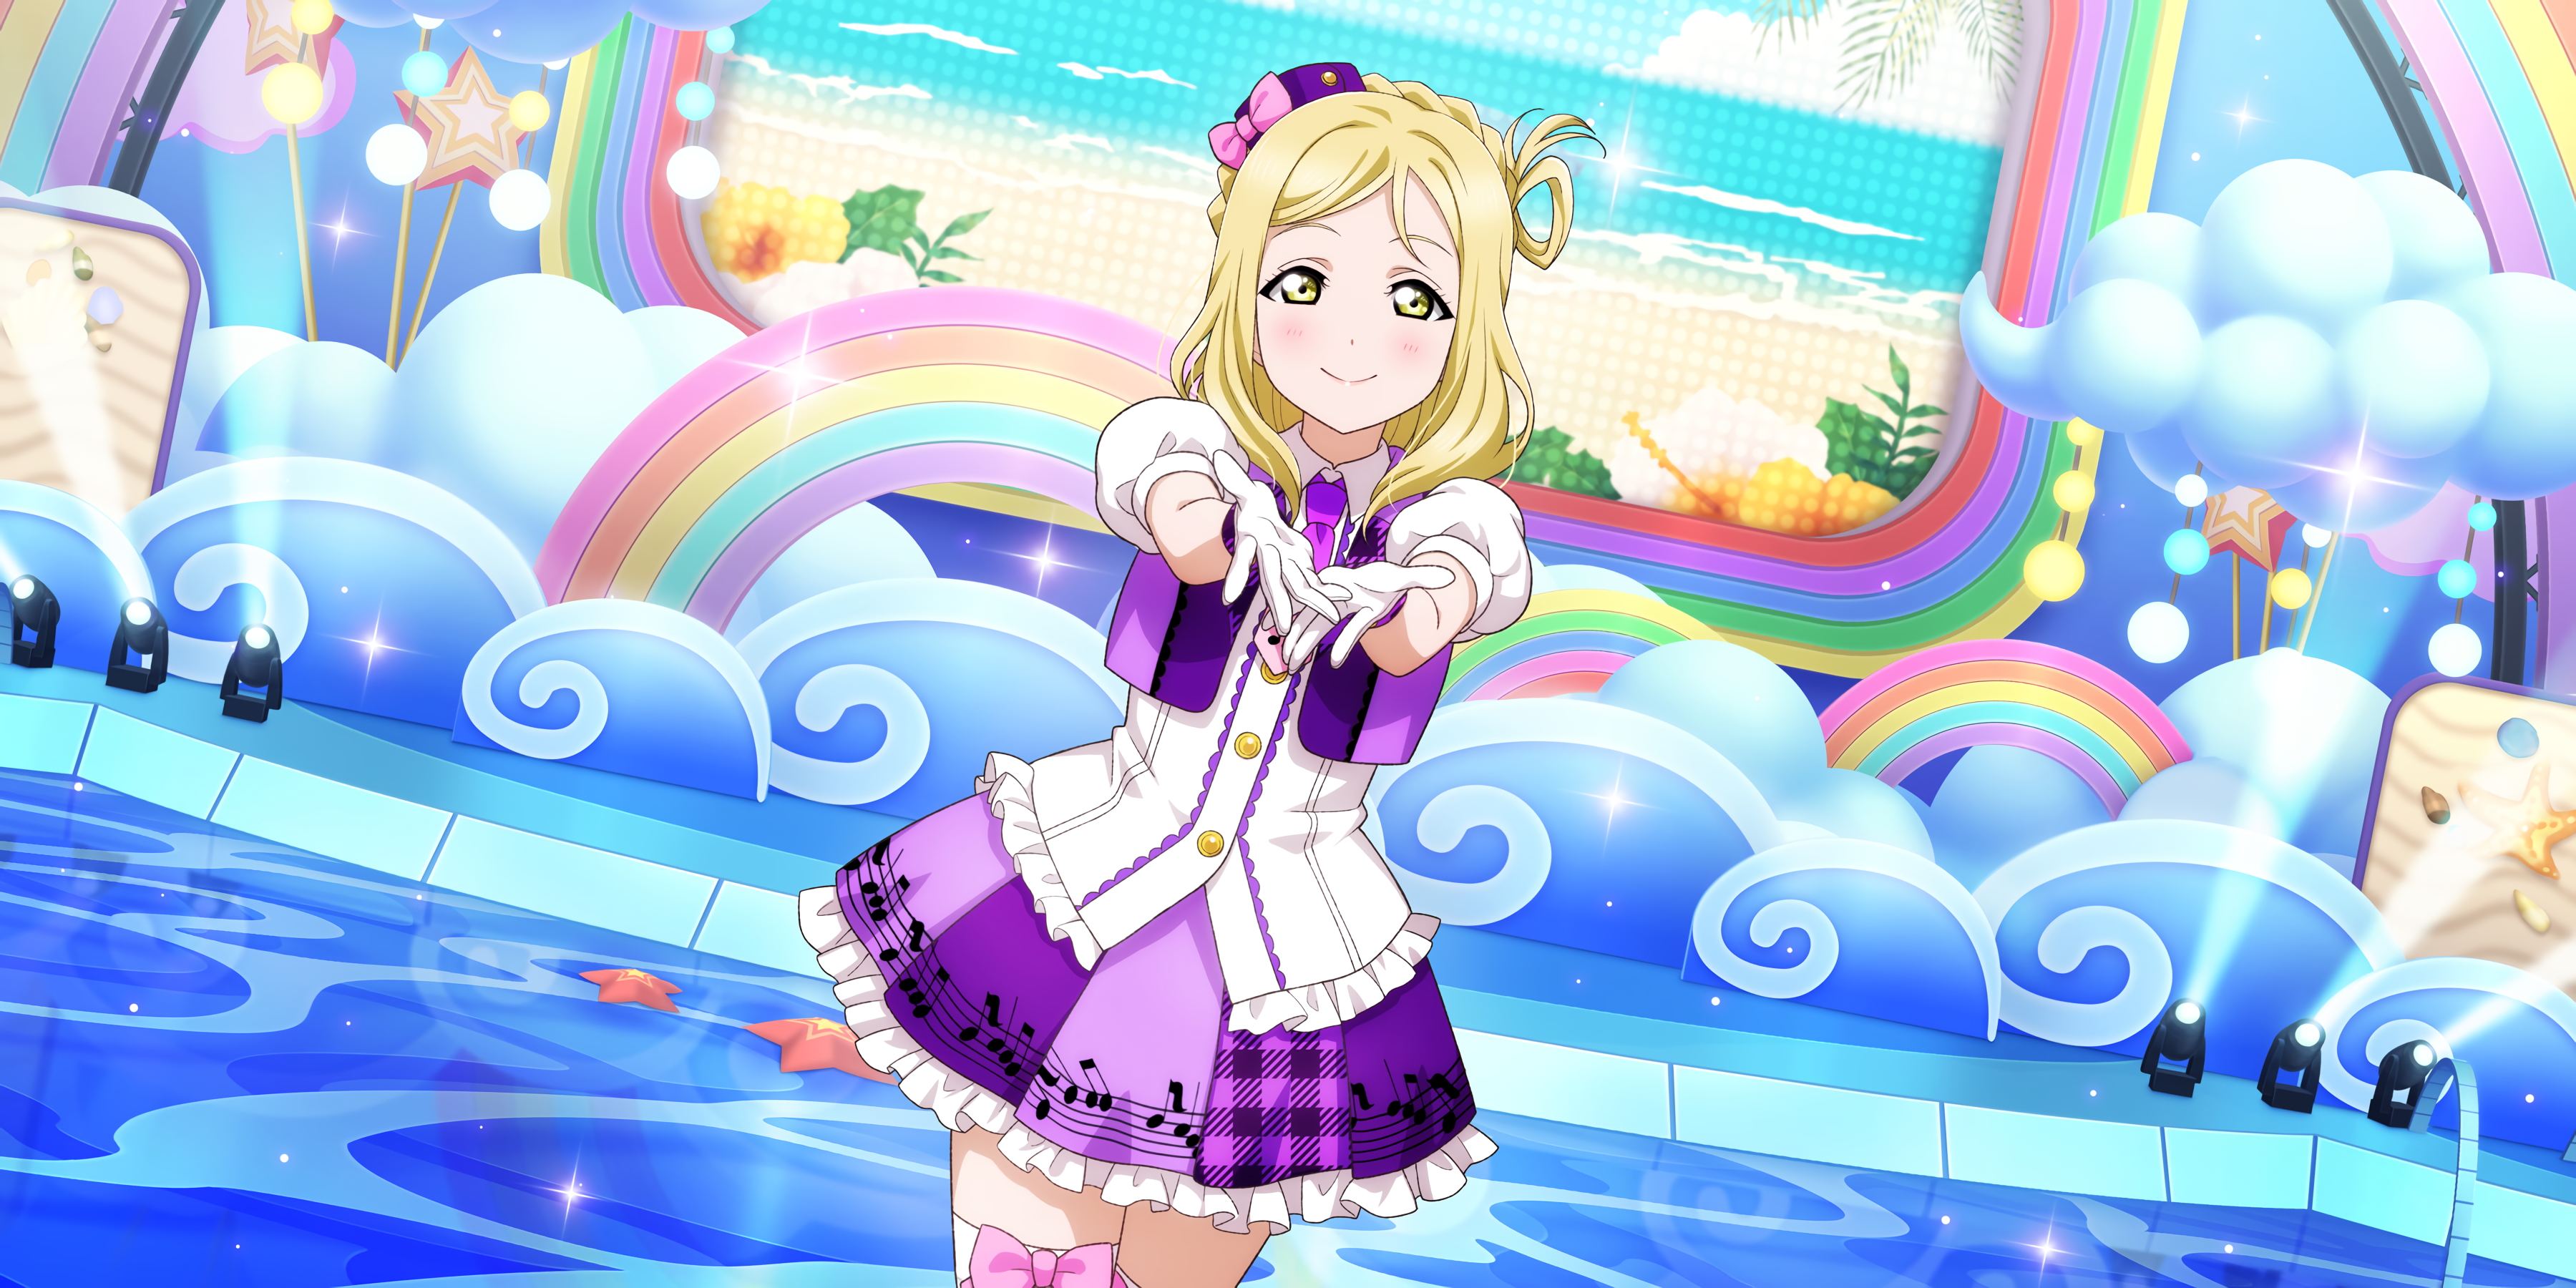 Anime 3600x1800 Ohara Mari Love Live! Sunshine Love Live! anime anime girls gloves smiling looking at viewer stages stage light stars uniform musical notes